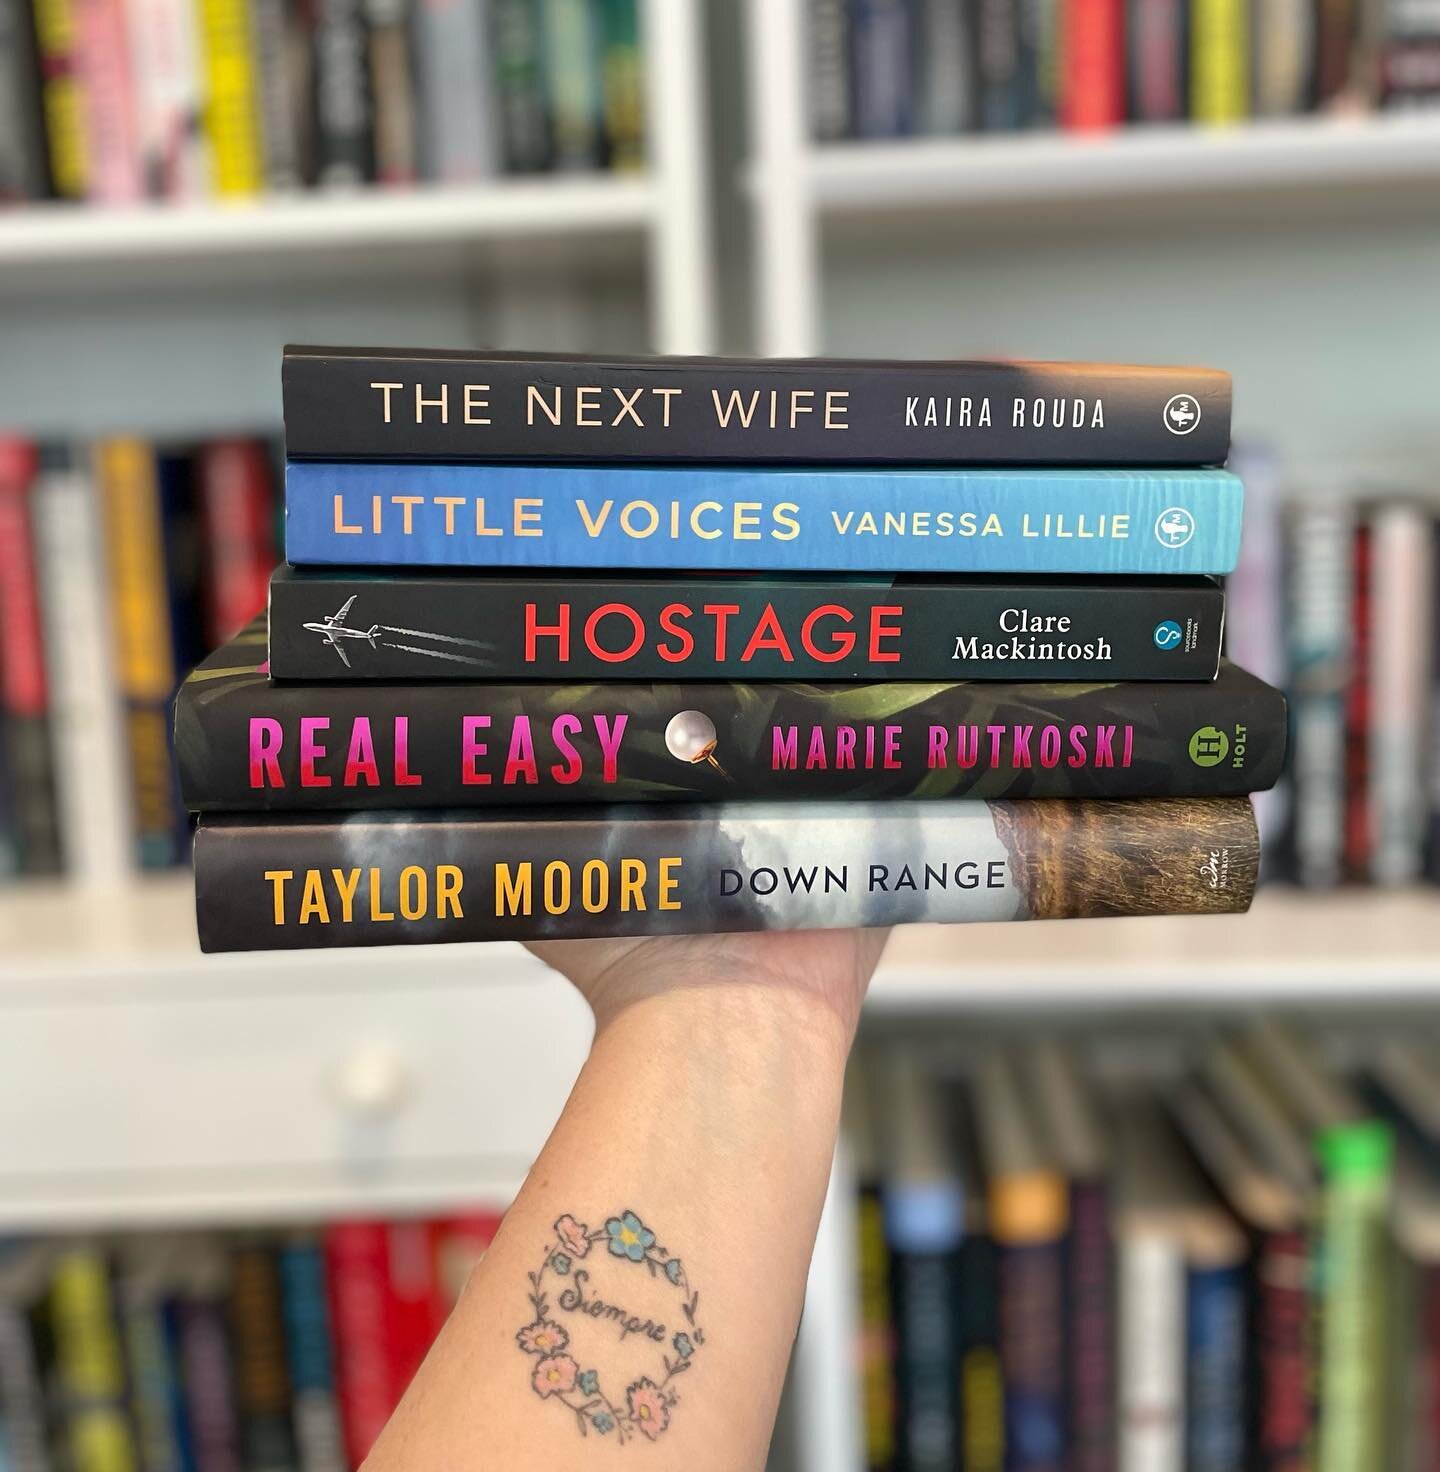 These are the last 5 books from my massive book haul from #thrillerfest last year and I am planning to enjoy them as the Thrillerfest Countdown is on! 

#bookstagram #tbrpile #toberead #tbr #thrillerbooks #mysterysuspense #books #booksbooksbooks #boo